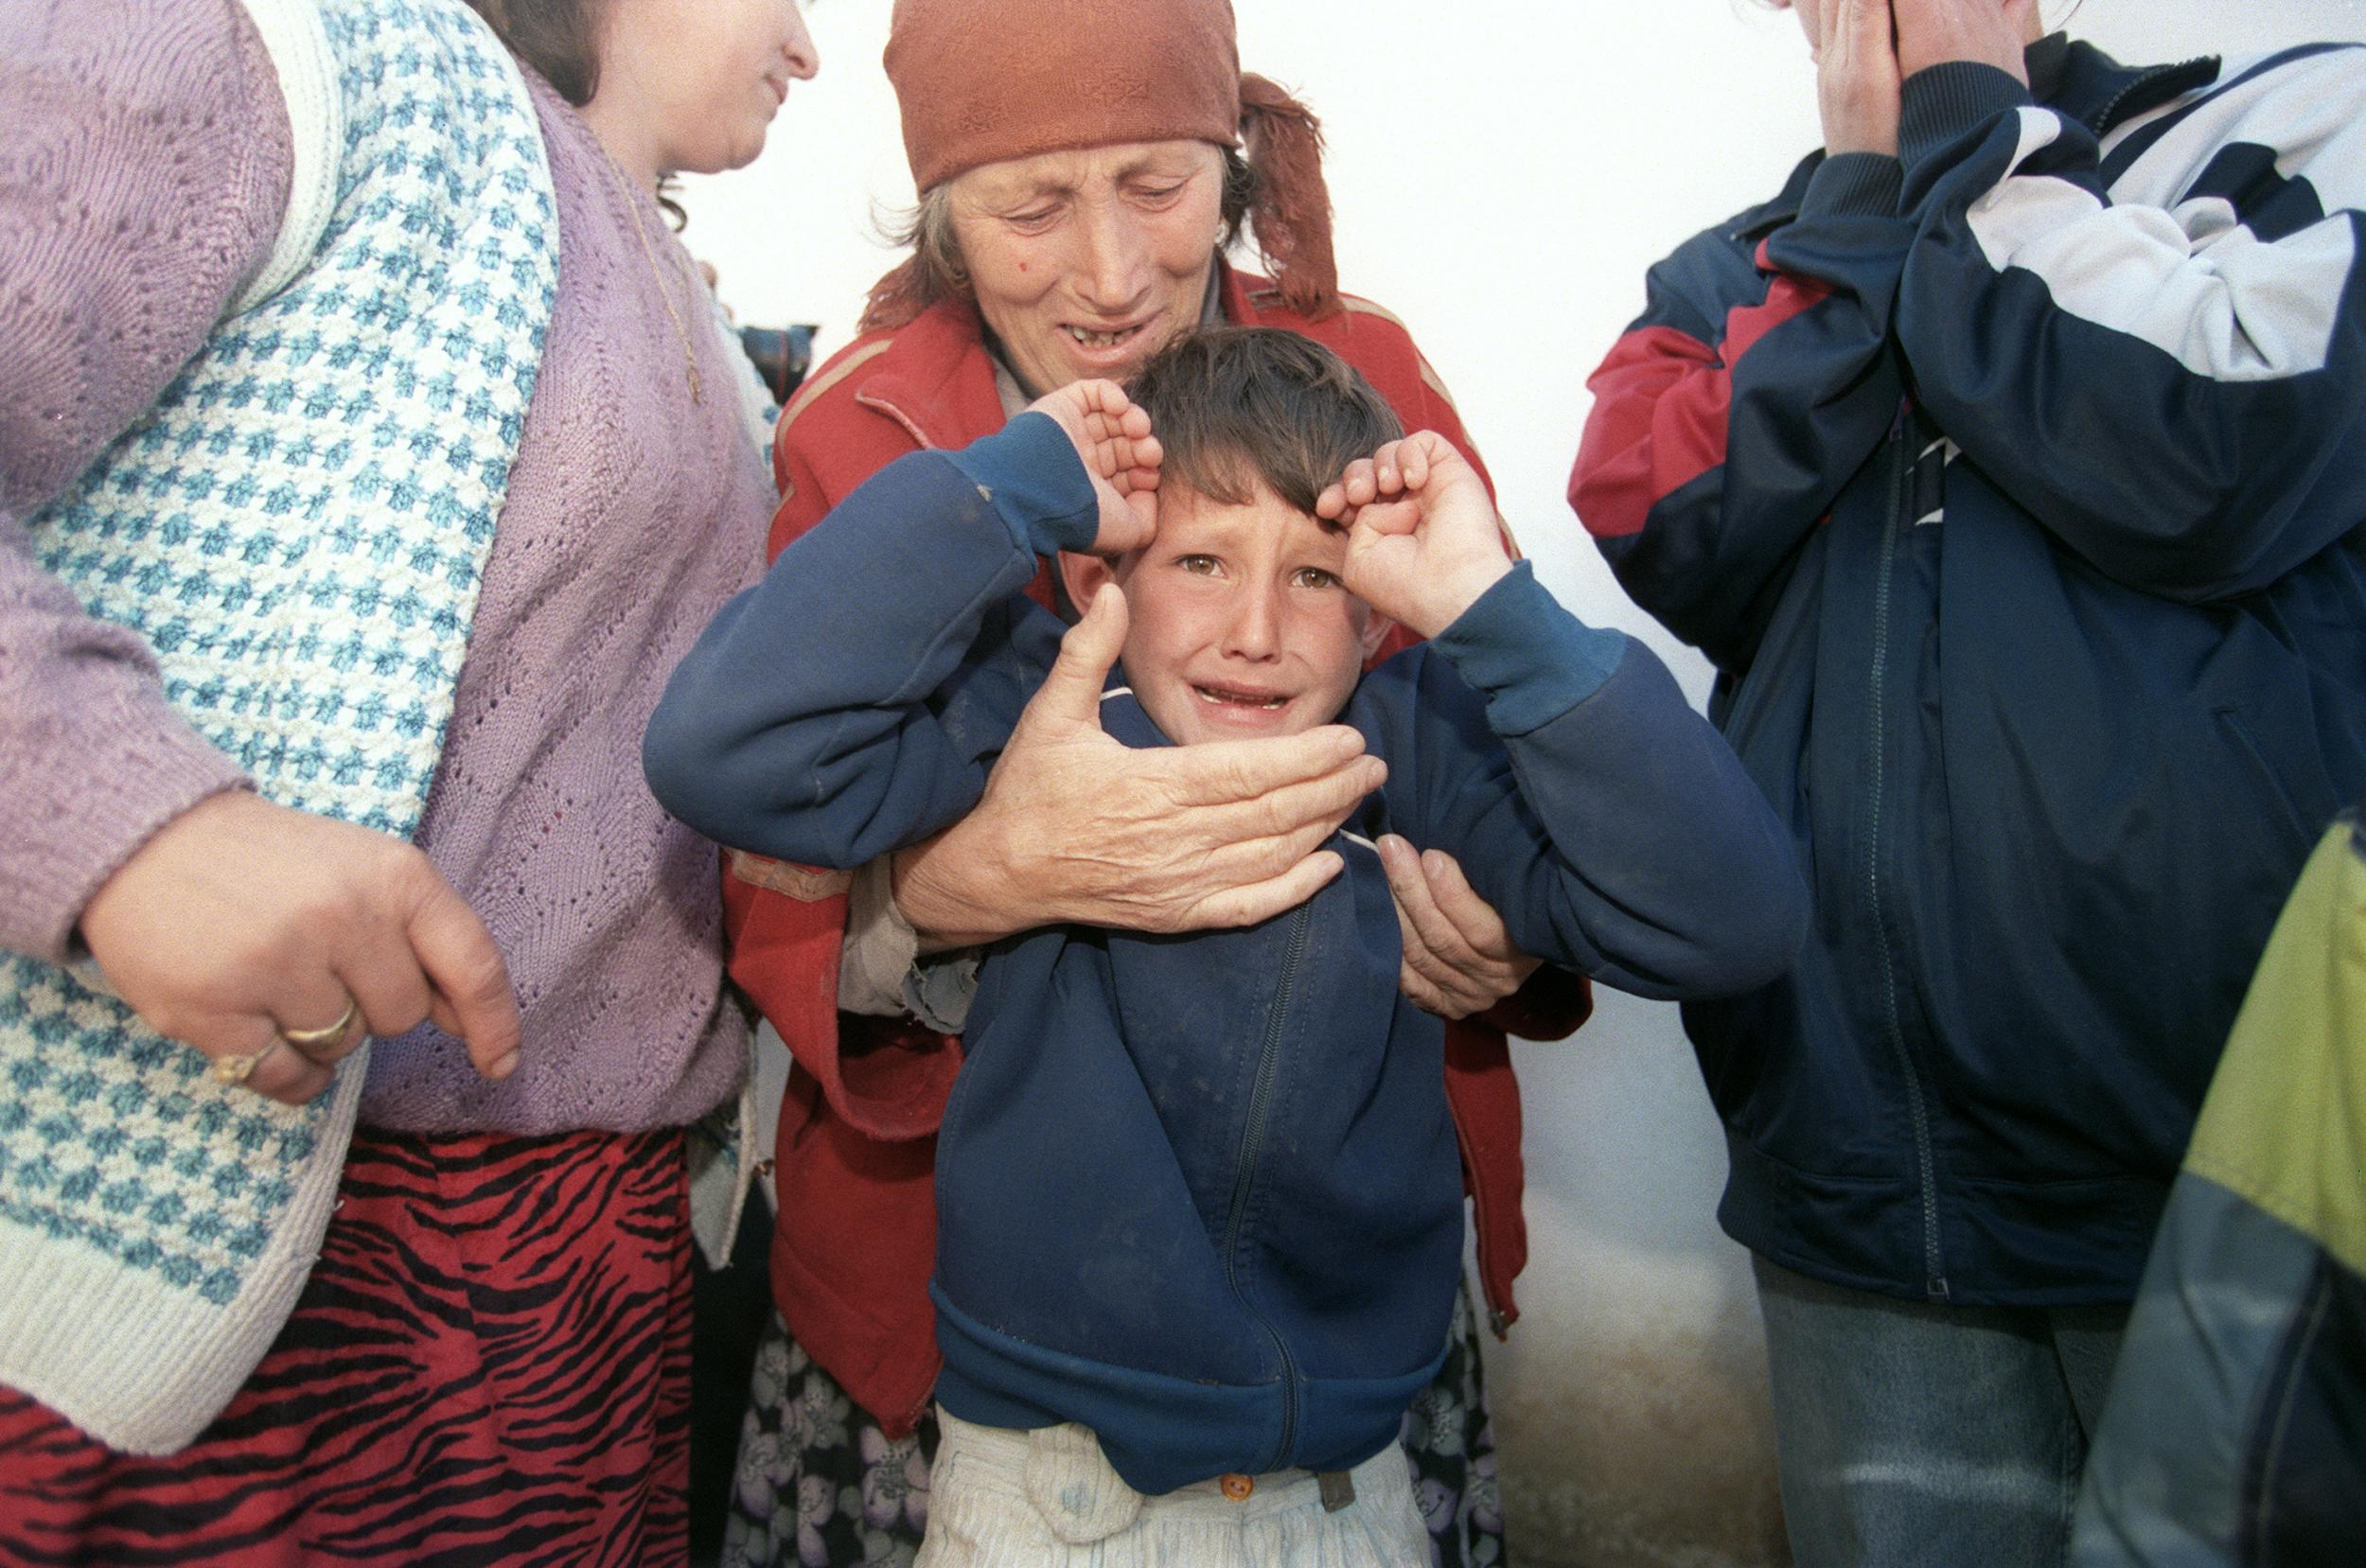 An elderly ethnic Albanian refugee woman from the village of Donje Prekaze in Kosovo holds her crying grandson as they hide from Serbian police in 1998